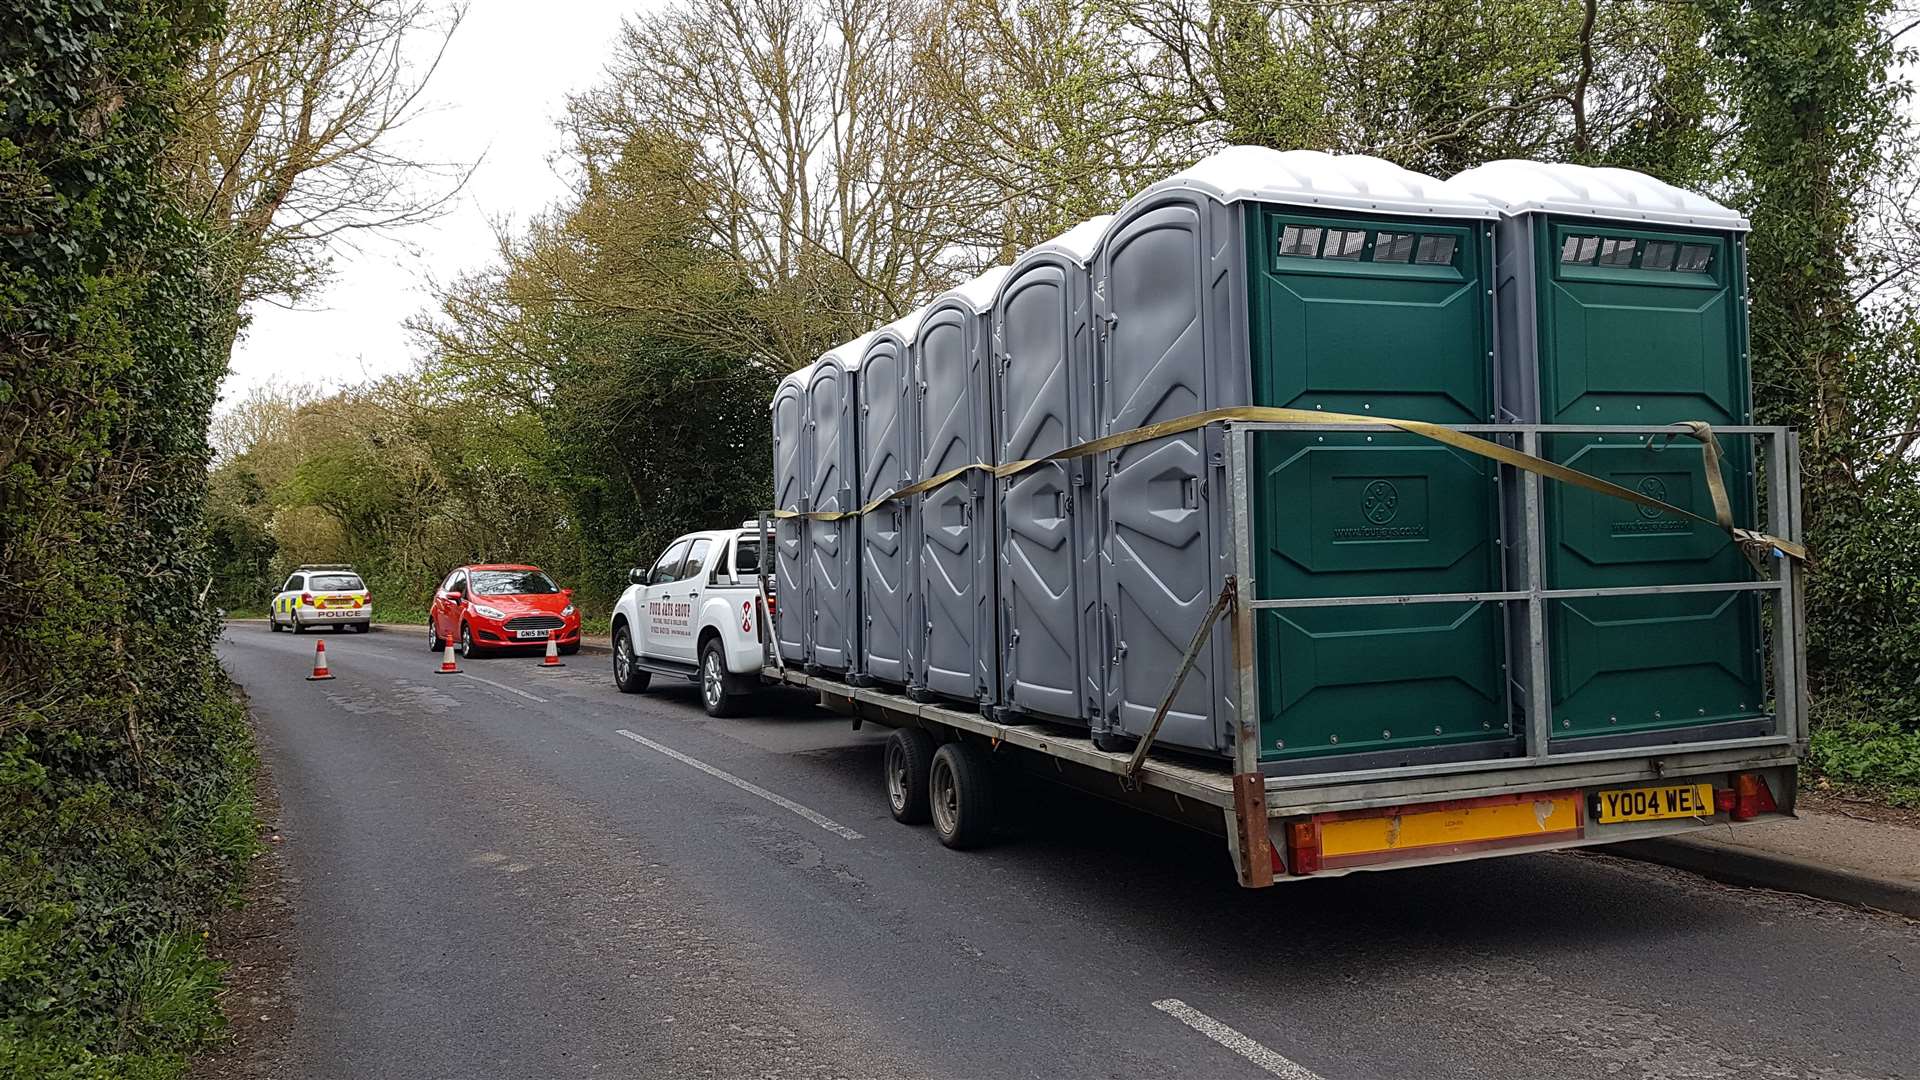 A dozen portable toilets arrive in Aylesham Road, suggesting officers will be at the scene for some time